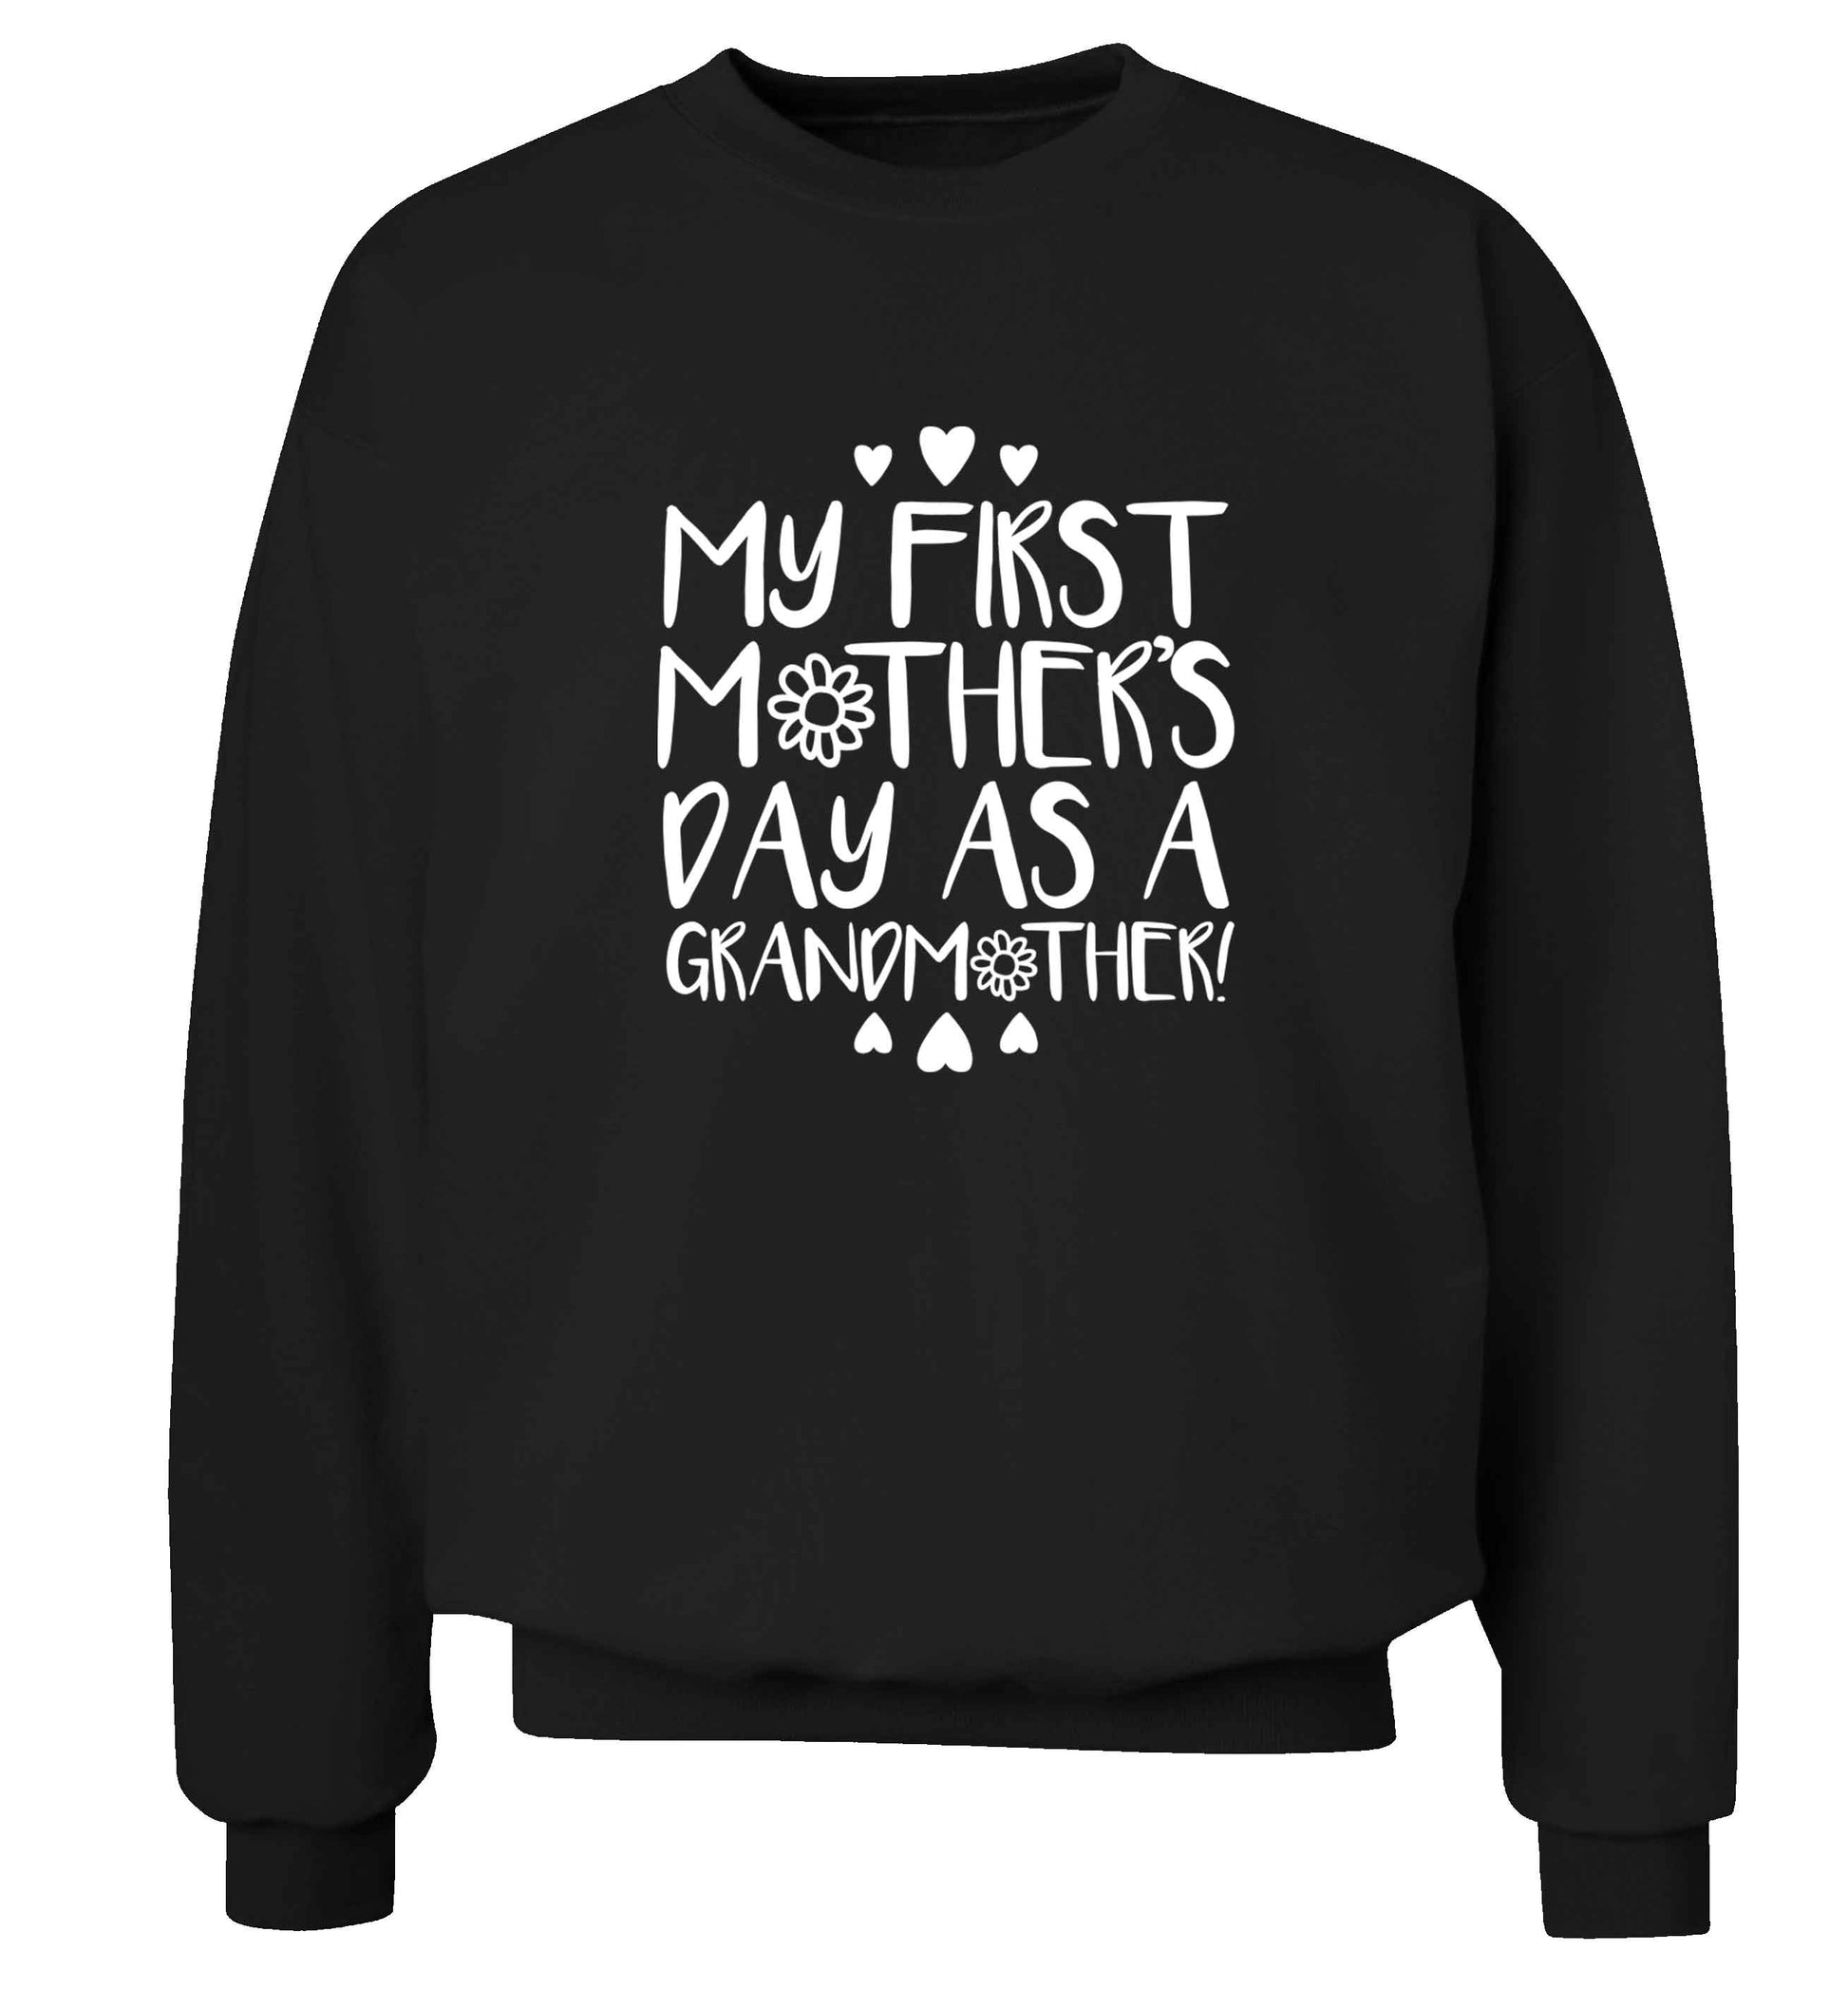 It's my first mother's day as a grandmother adult's unisex black sweater 2XL